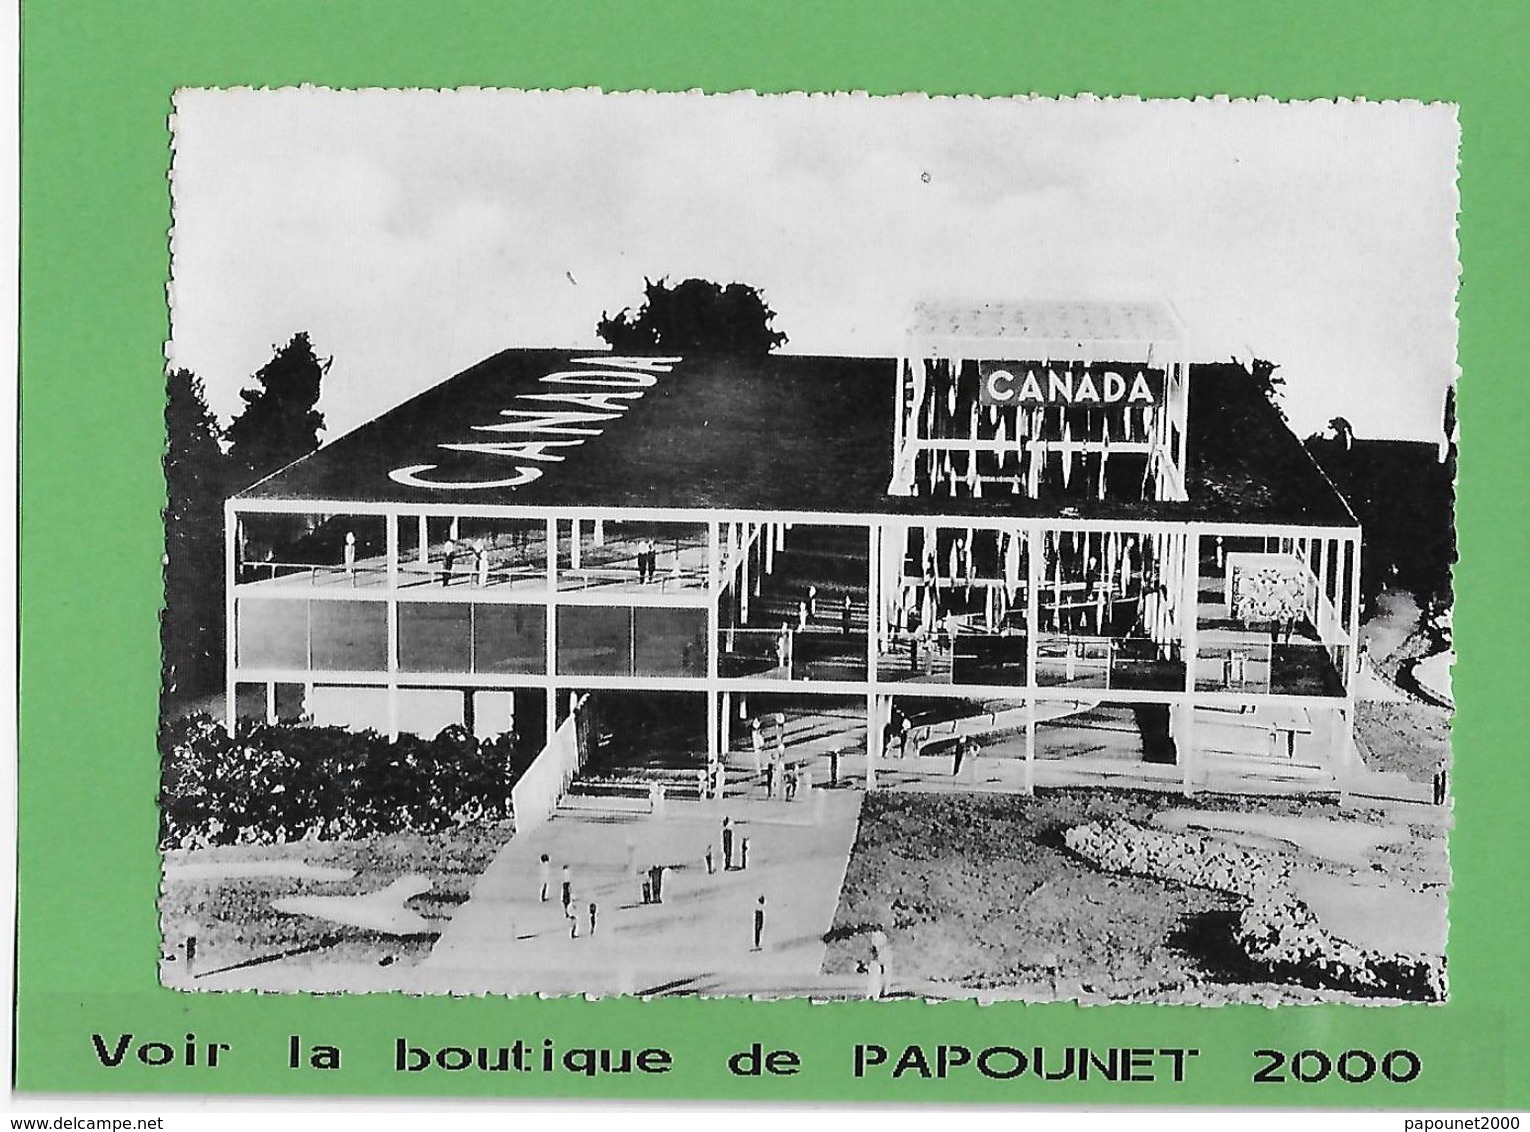 00037-04659-E BE04 1000-EXPO 58 - Expositions Universelles